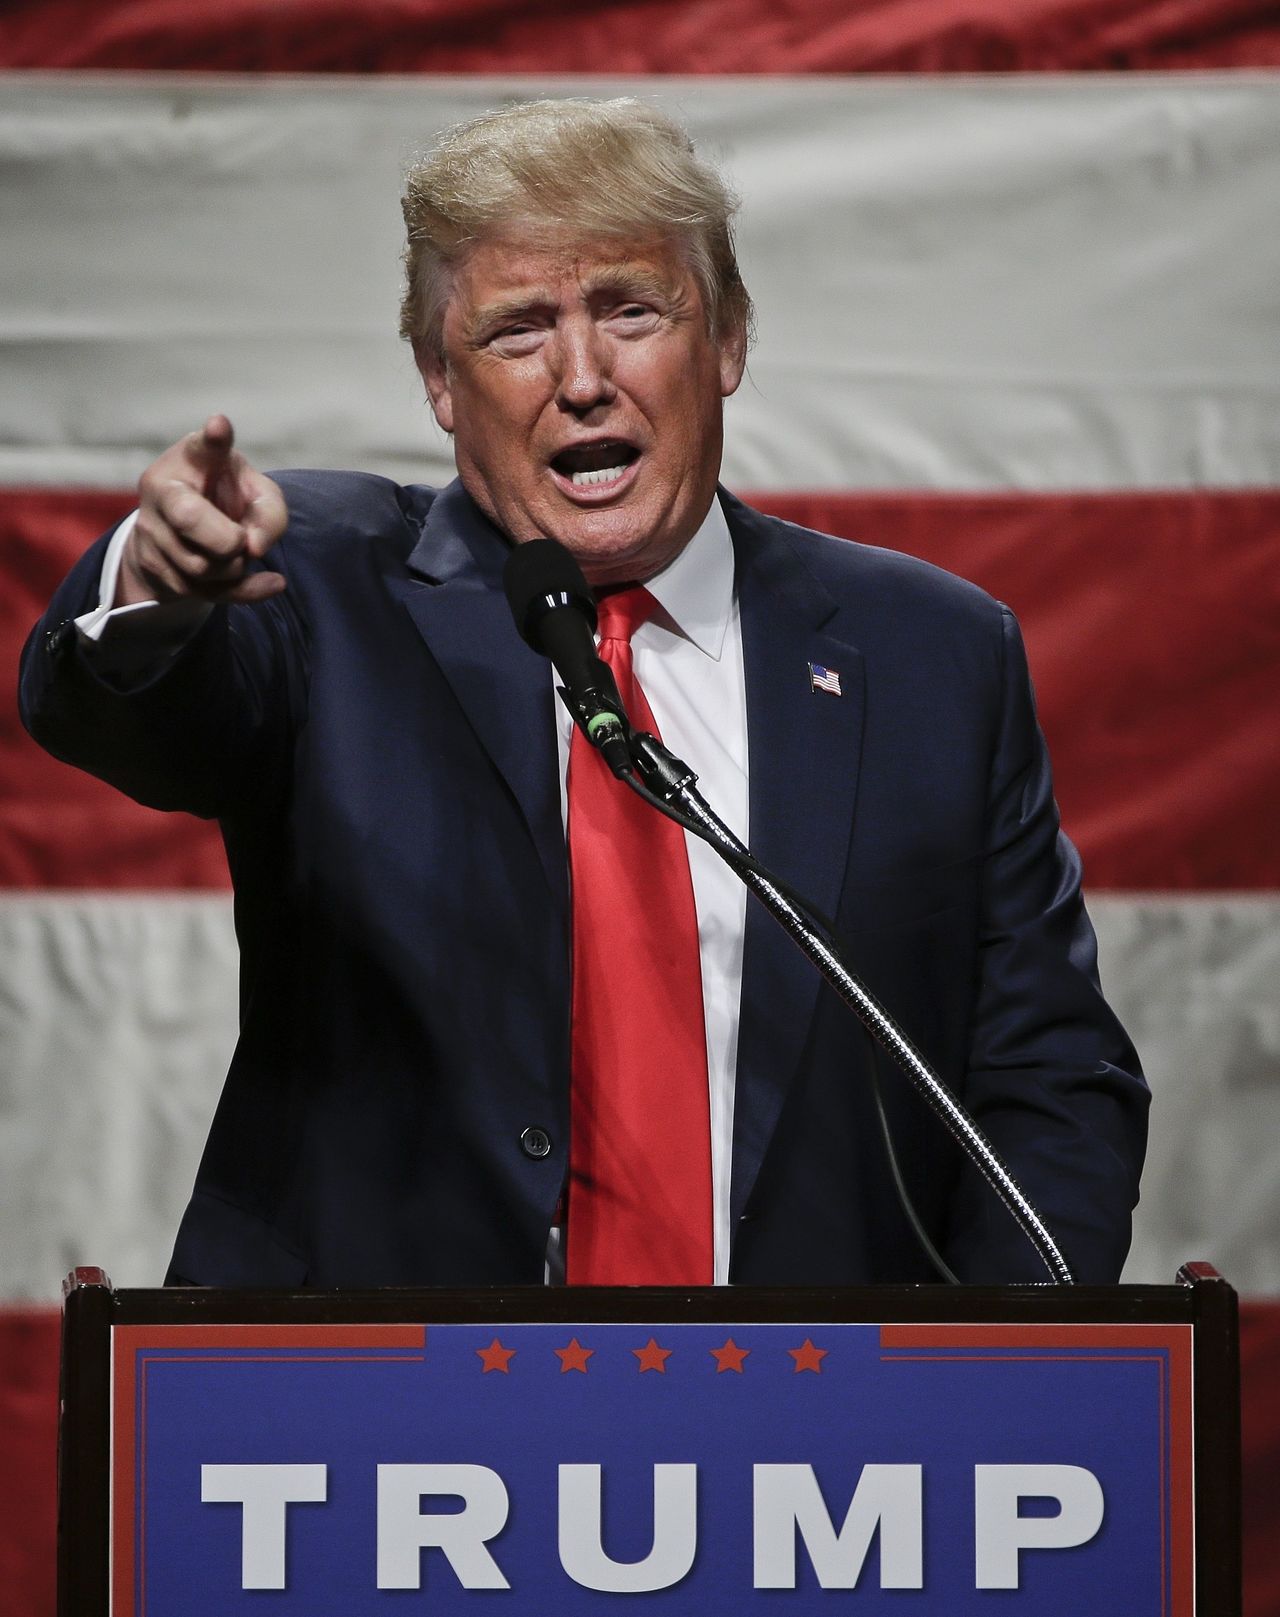 Republican presidential candidate Donald Trump speaks at a campaign event Sunday in Poughkeepsie, New York.